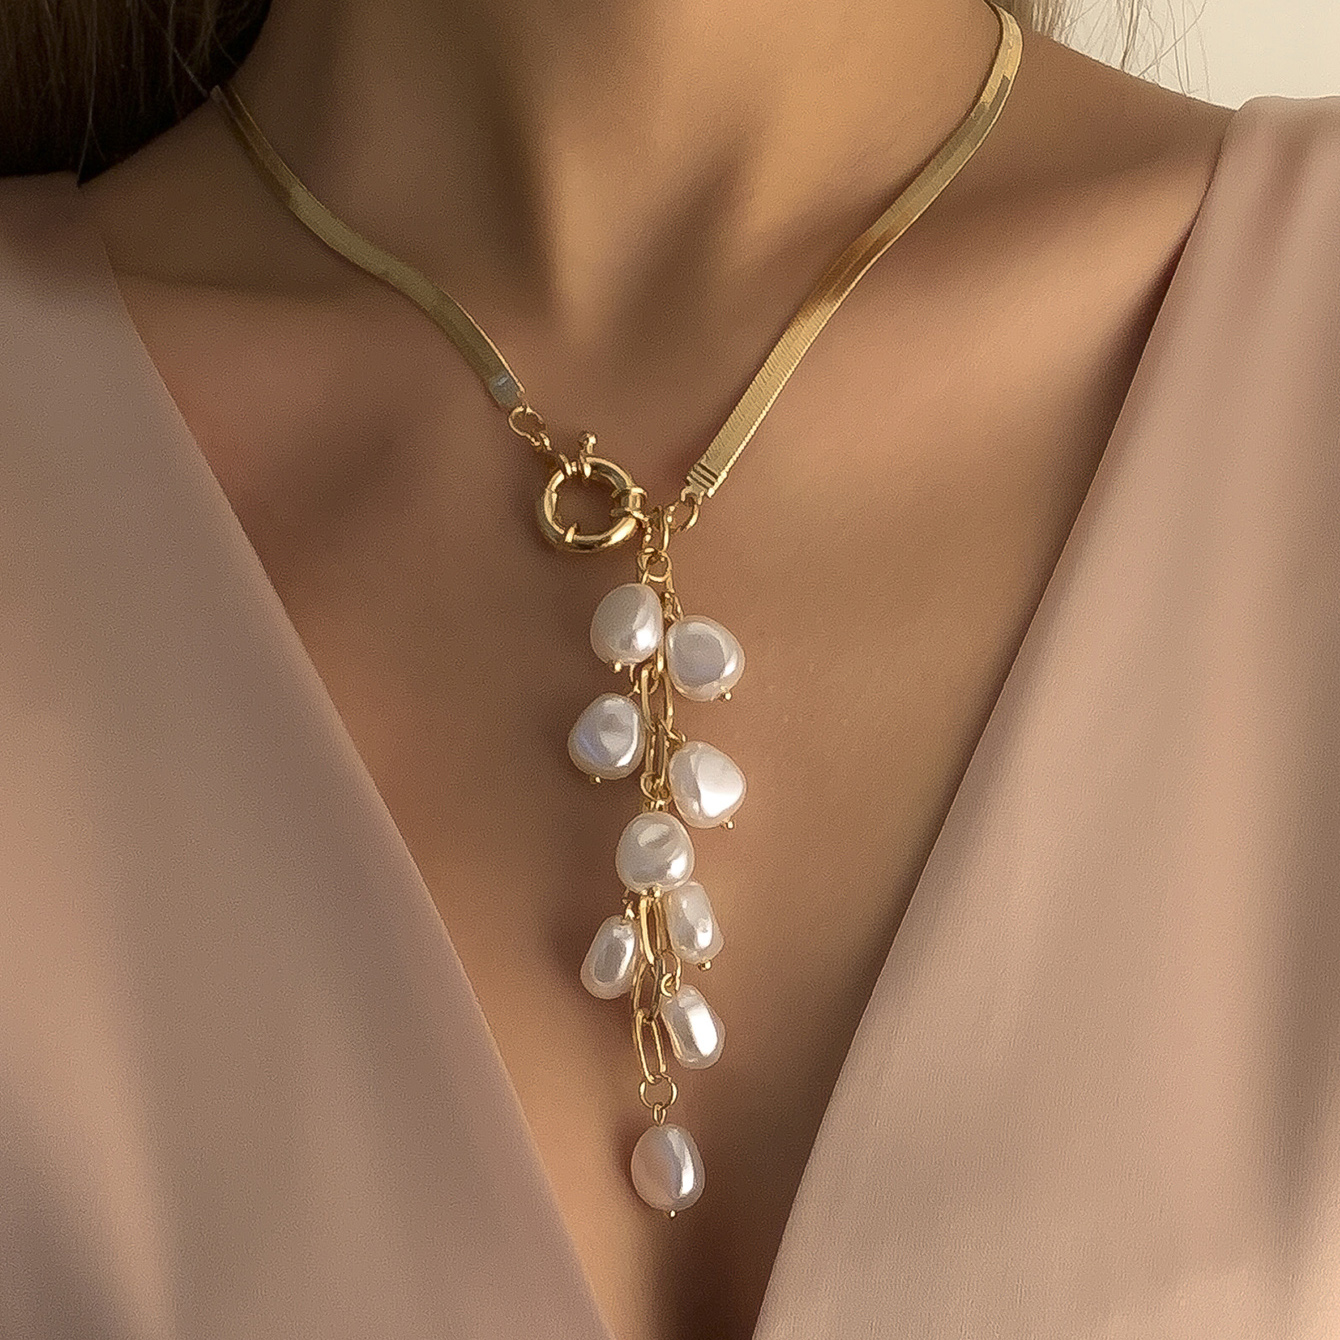 Faux Pearl Decor Necklace Elegant Short Clavicle Chain Necklace All Match  Jewelry Accessories For Women Girls